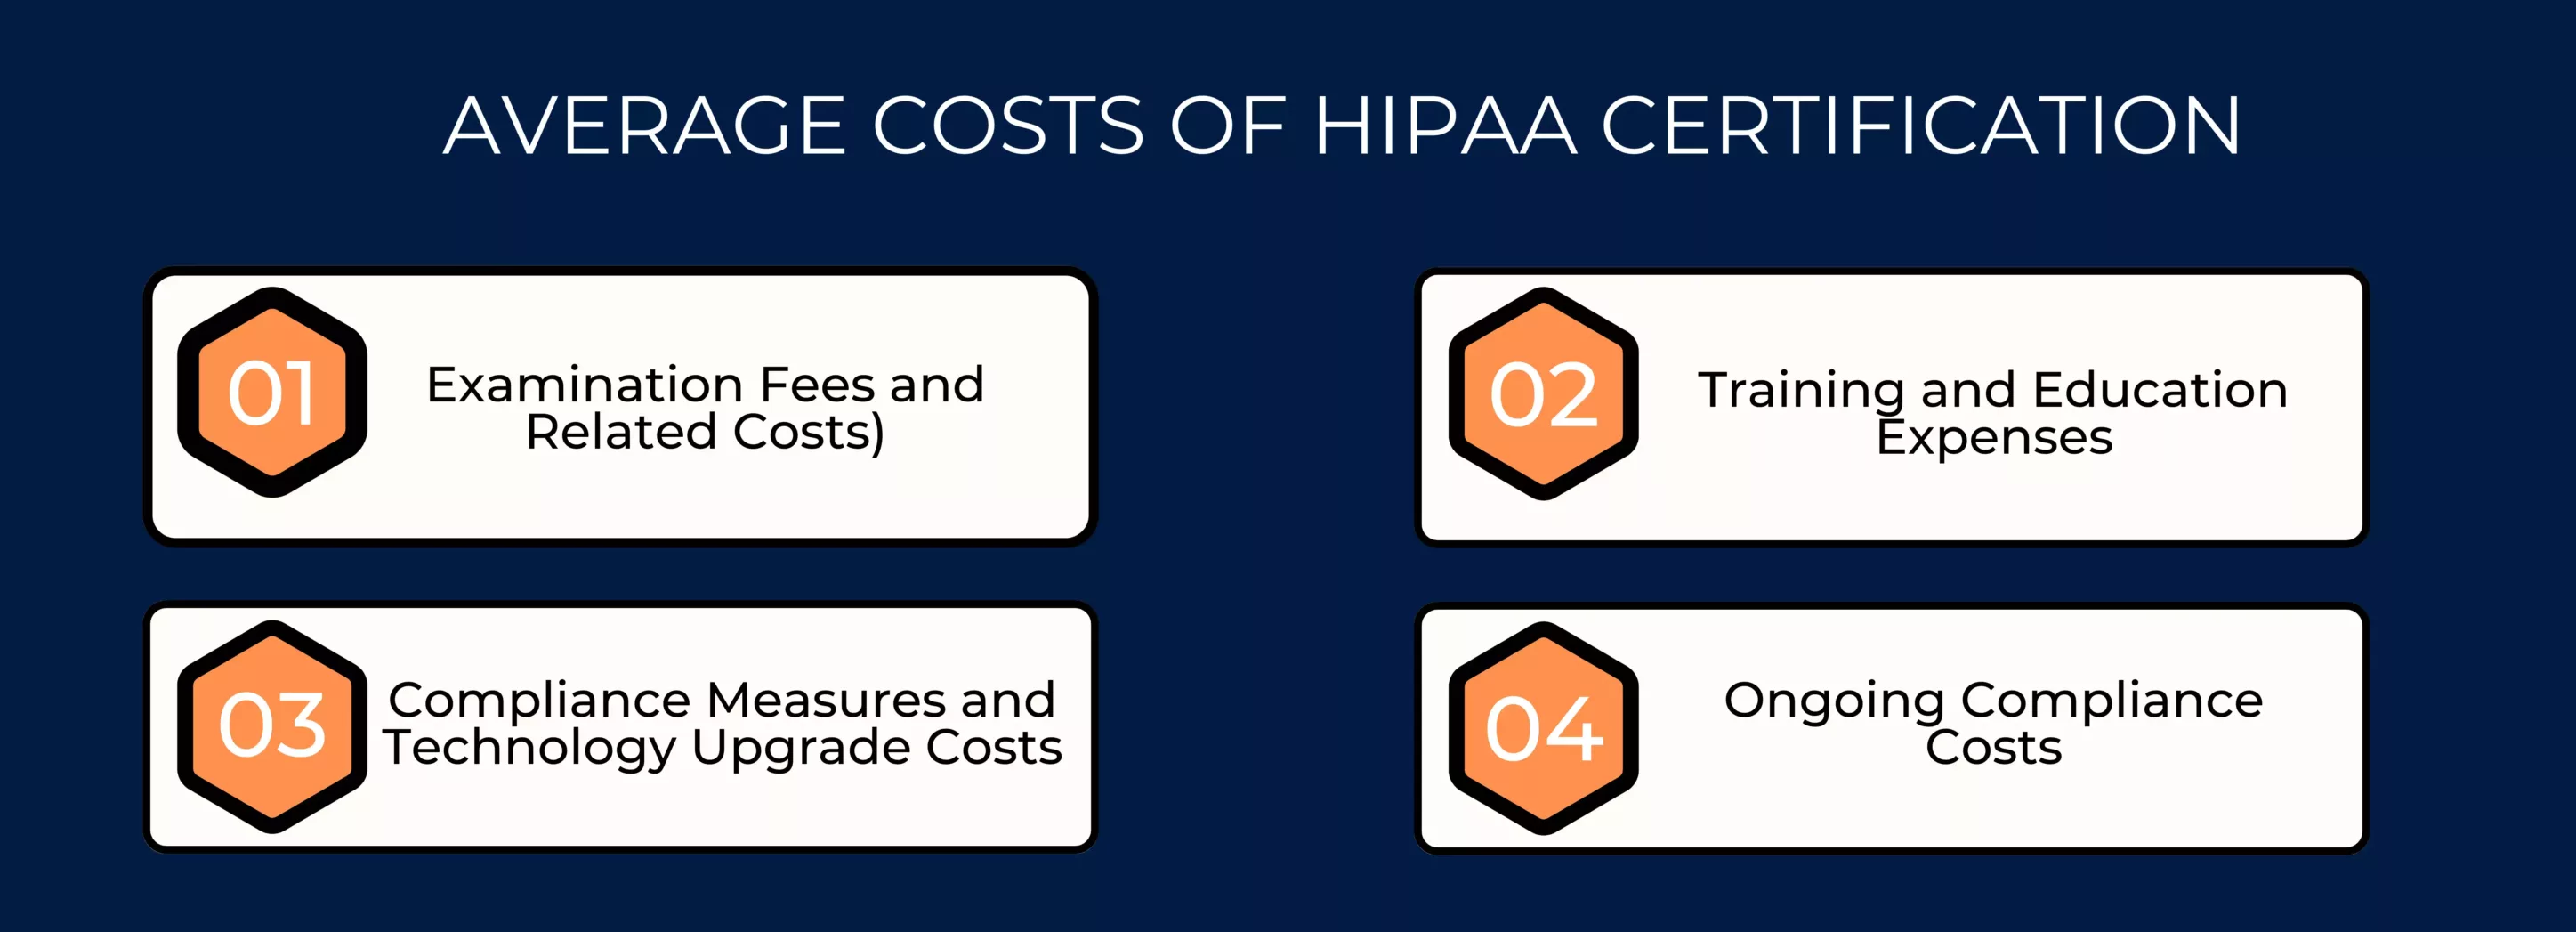 Average costs of HIPAA certification